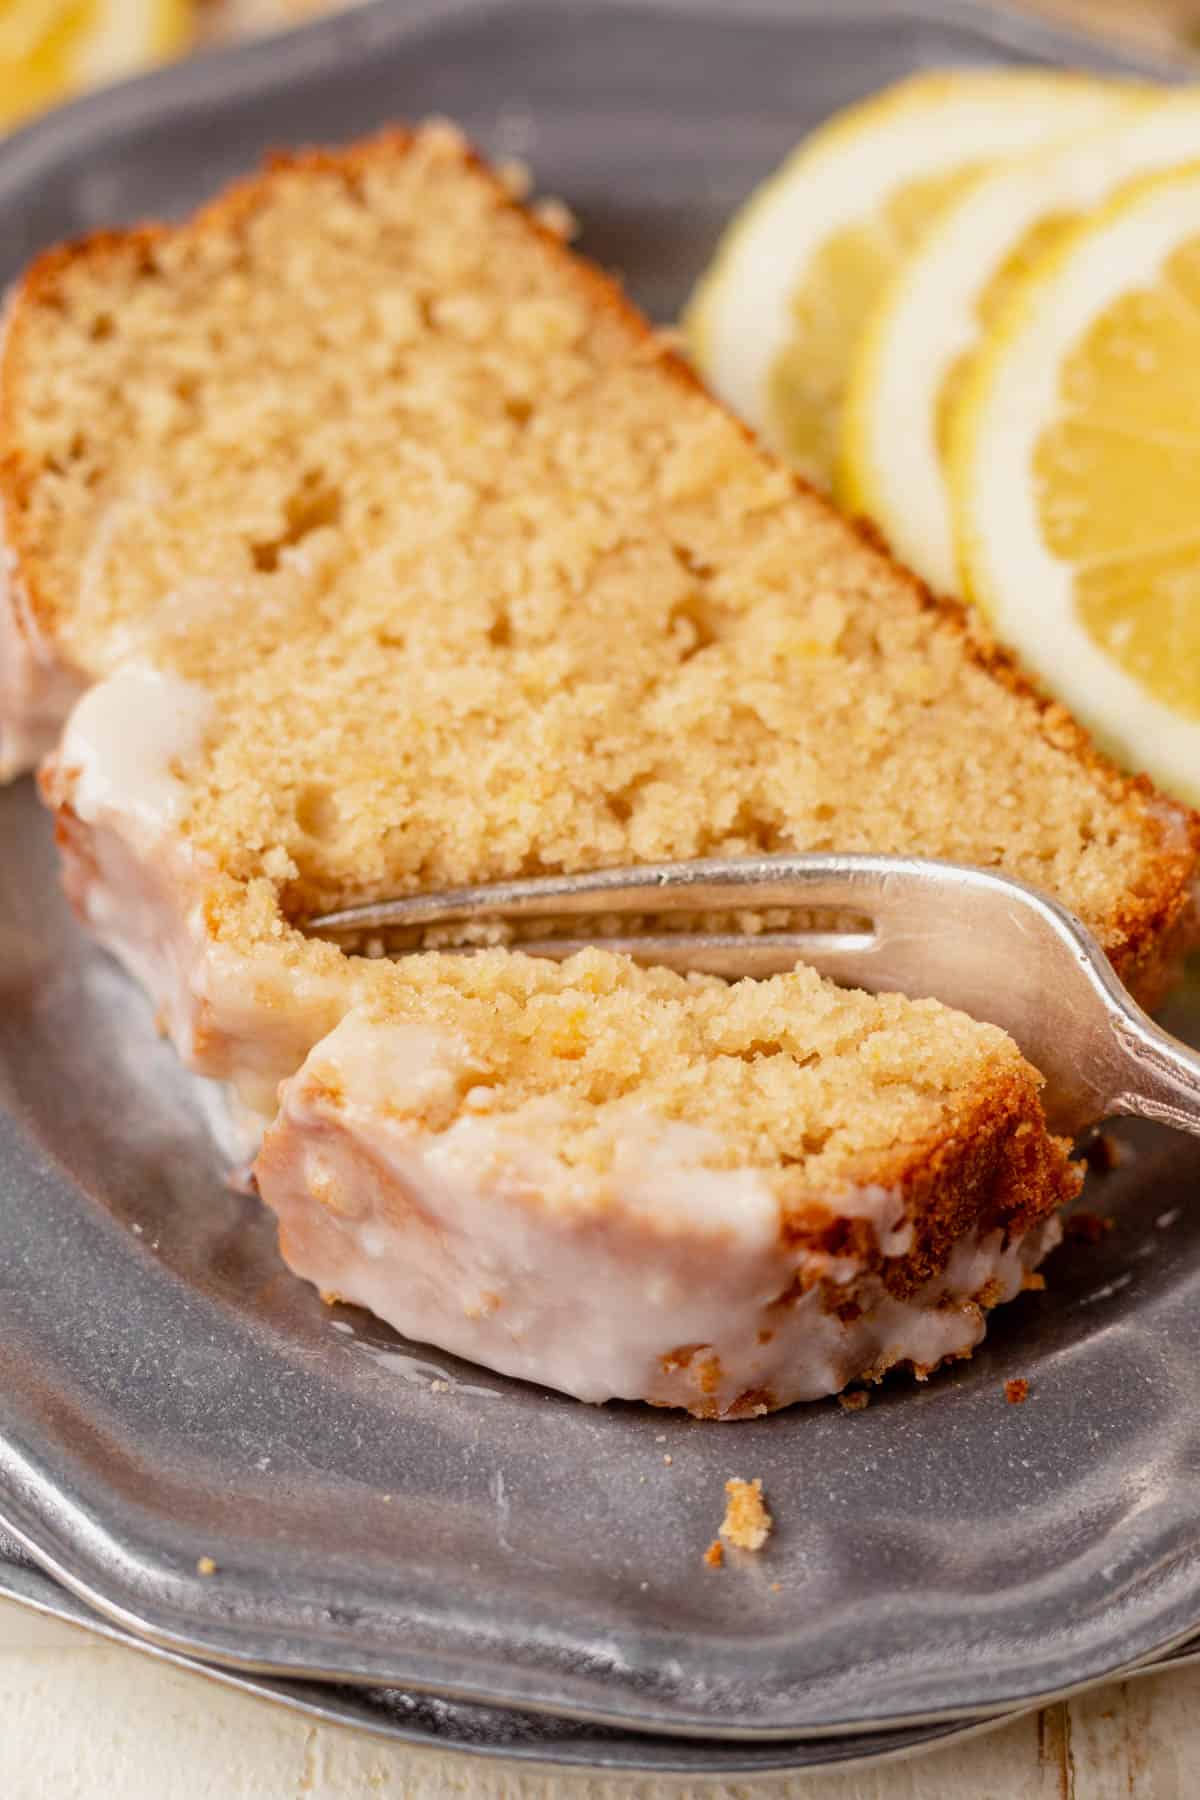 fork cutting into a piece of gluten-free lemon drizzle cake